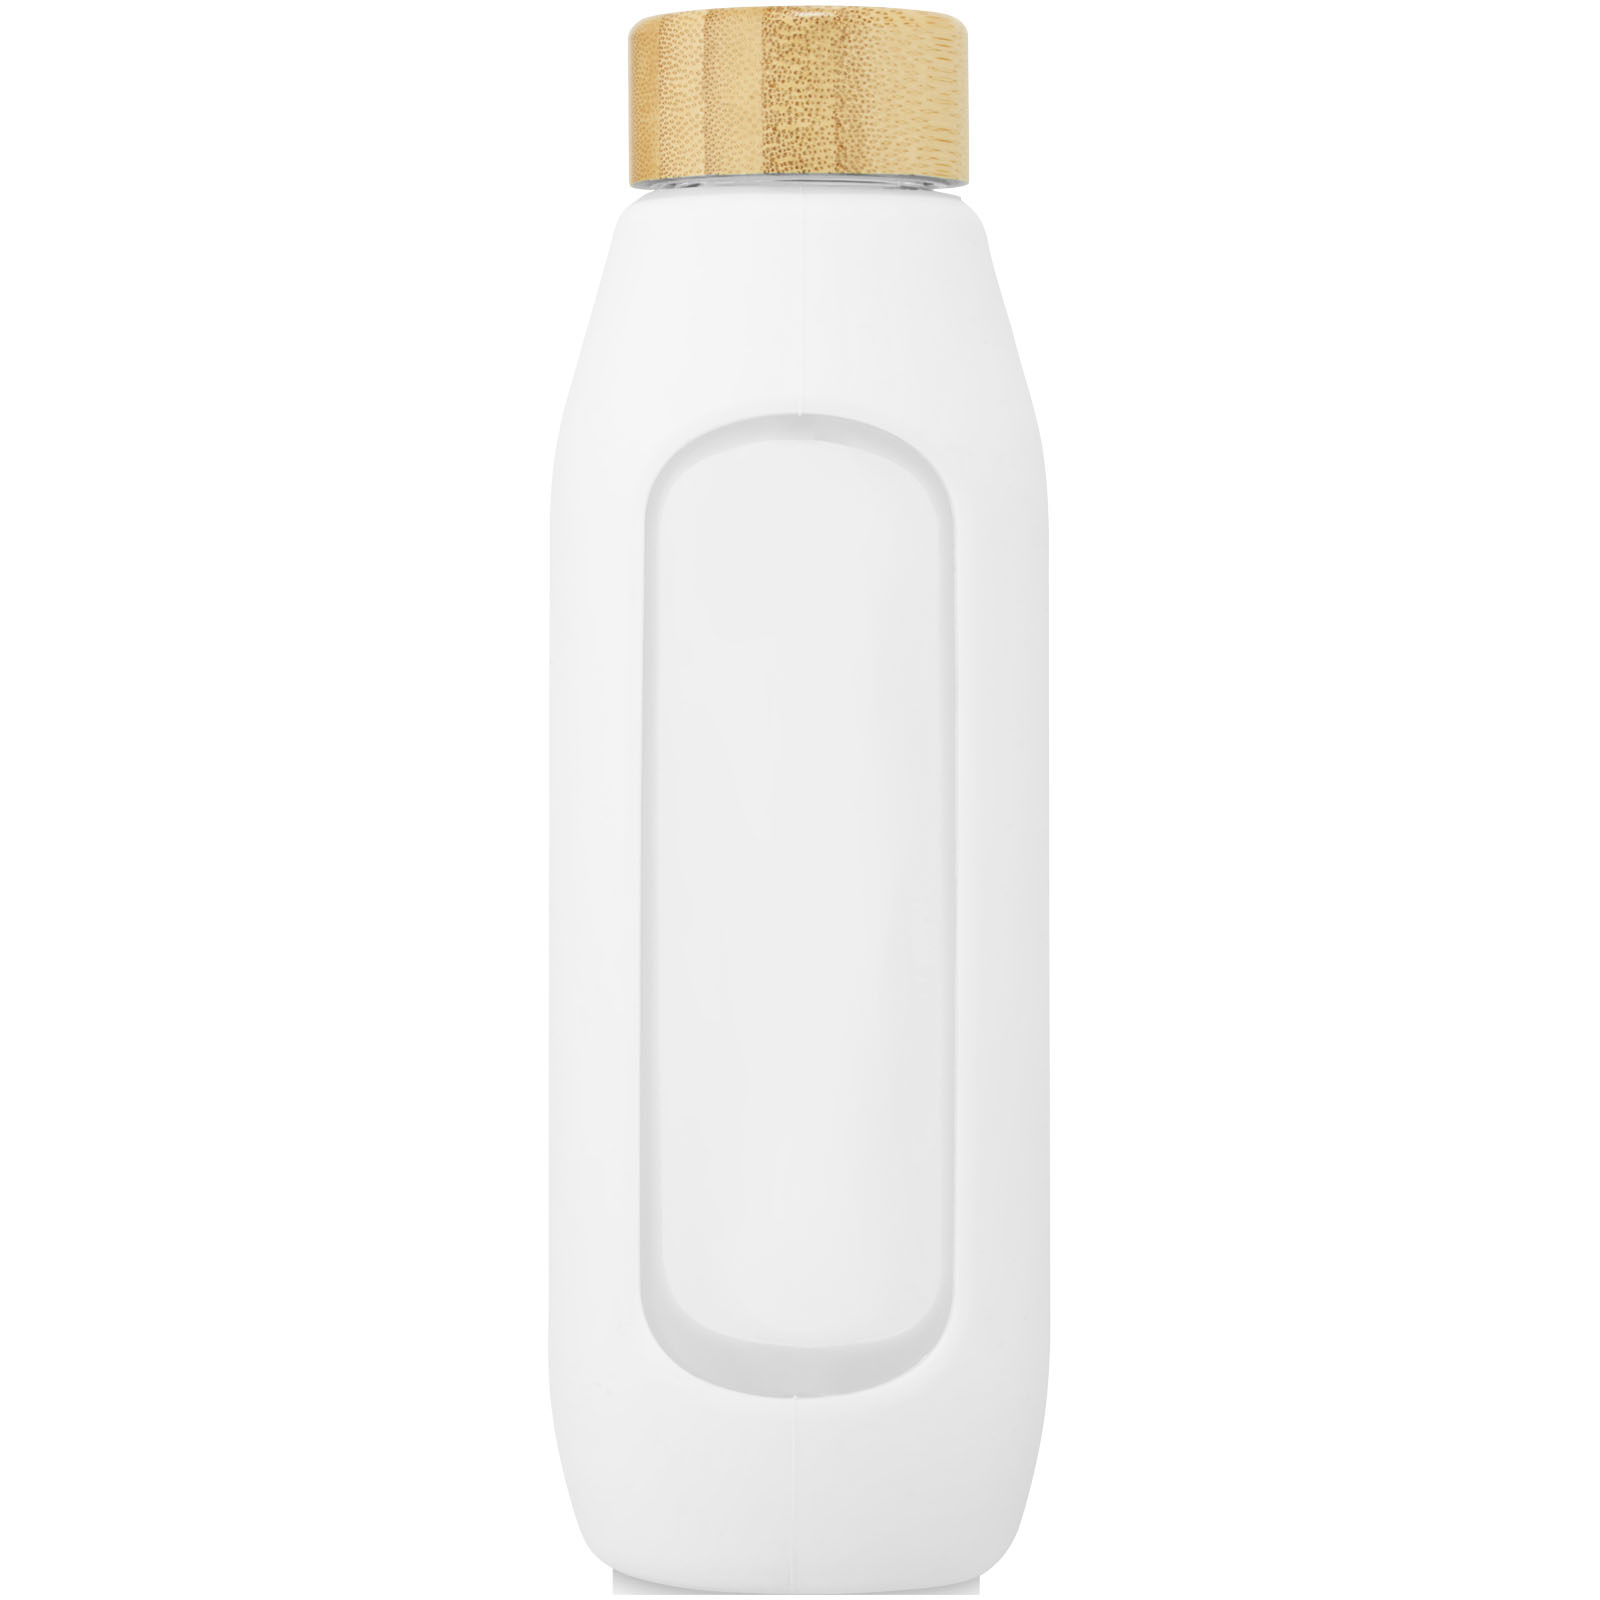 Advertising Water bottles - Tidan 600 ml borosilicate glass bottle with silicone grip - 2